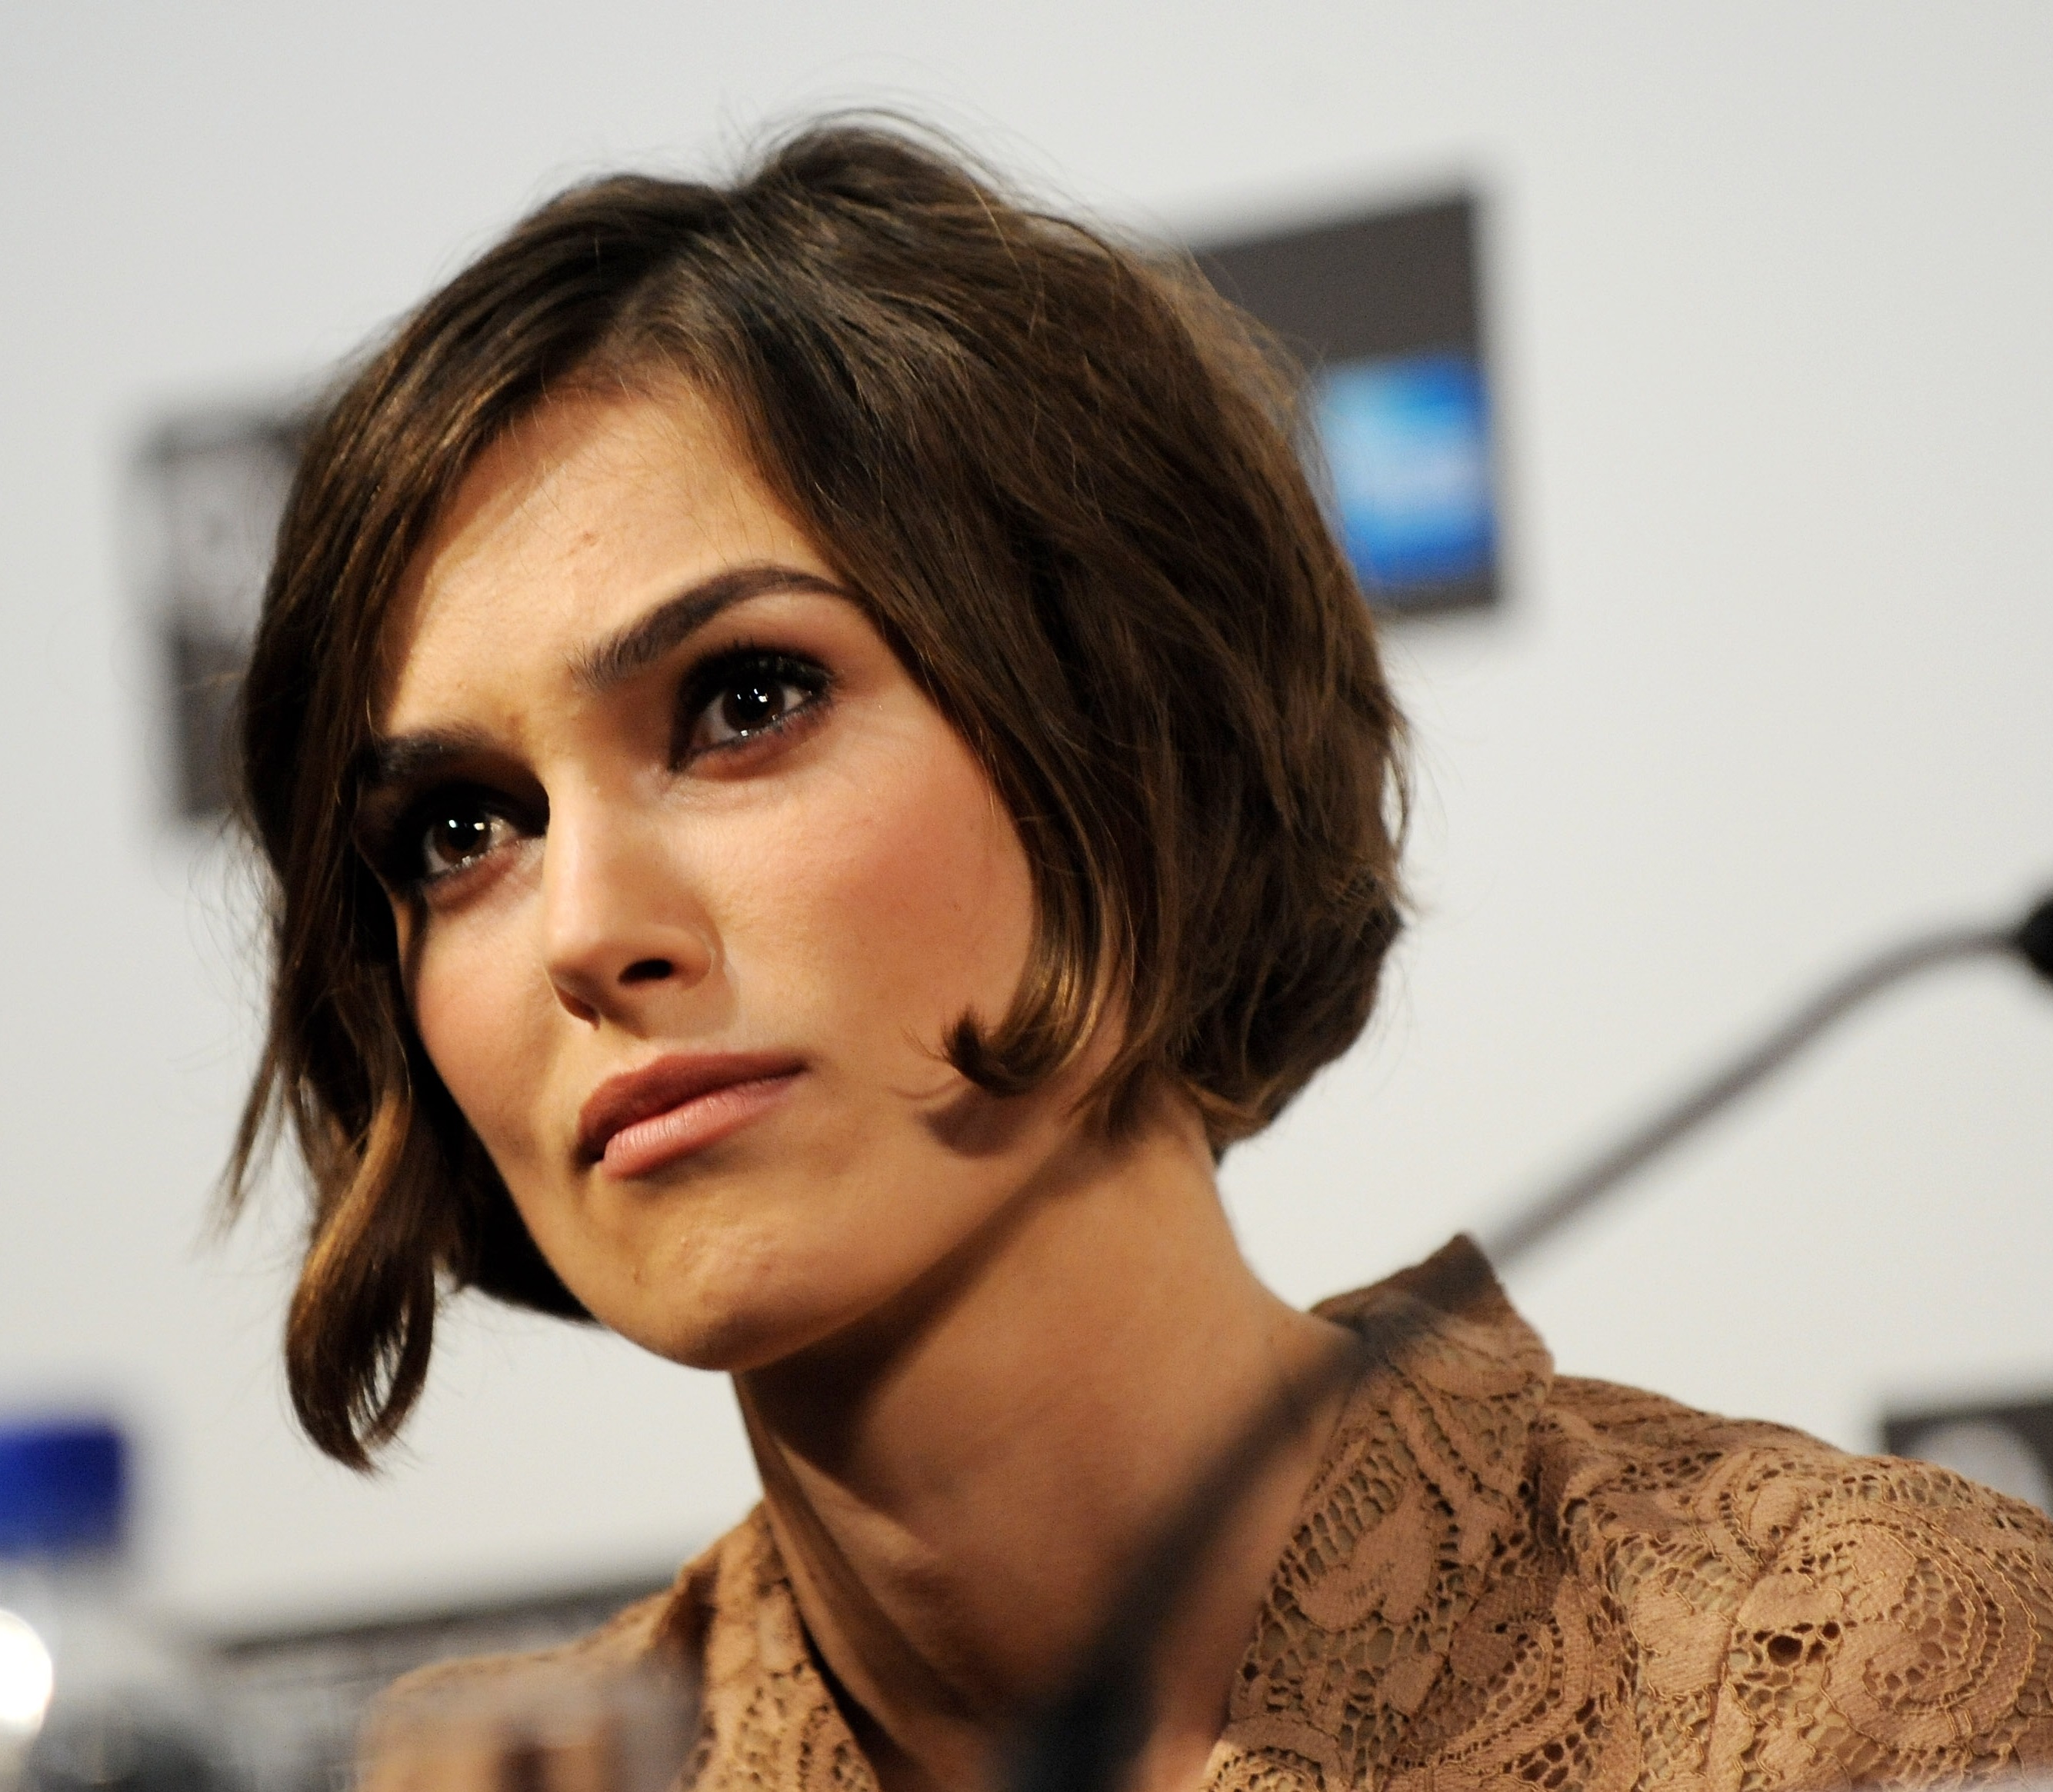 467 Keira Knightley Stock Photos, Images & Pictures